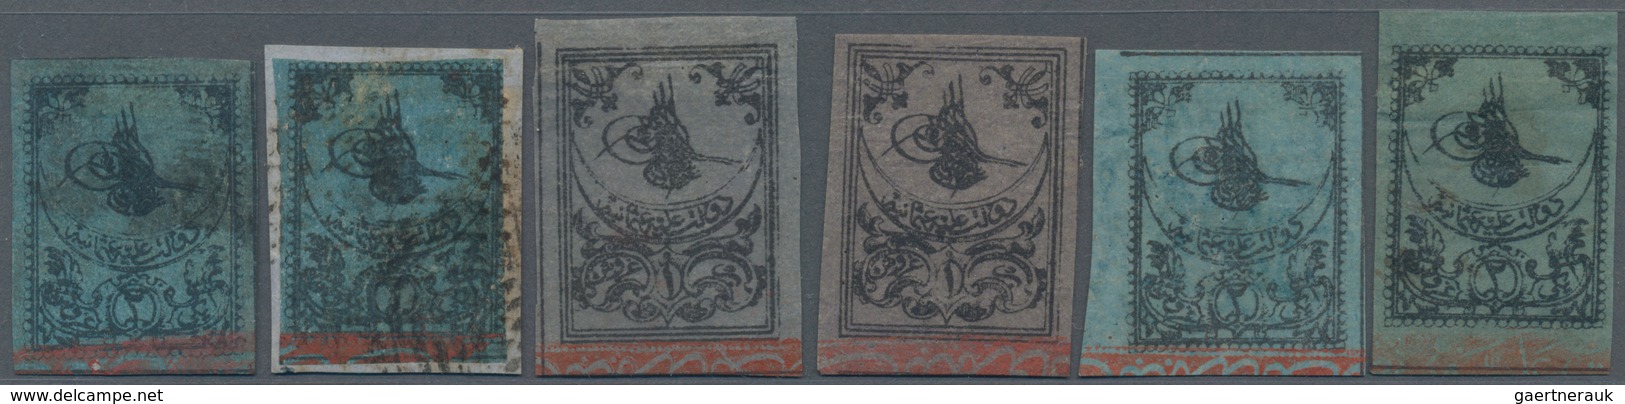 Türkei: 1863-1930, Small Lot Of 11 First Issues "Tughra" And Few Republic Stamps Up To Atatürk, Fine - Oblitérés